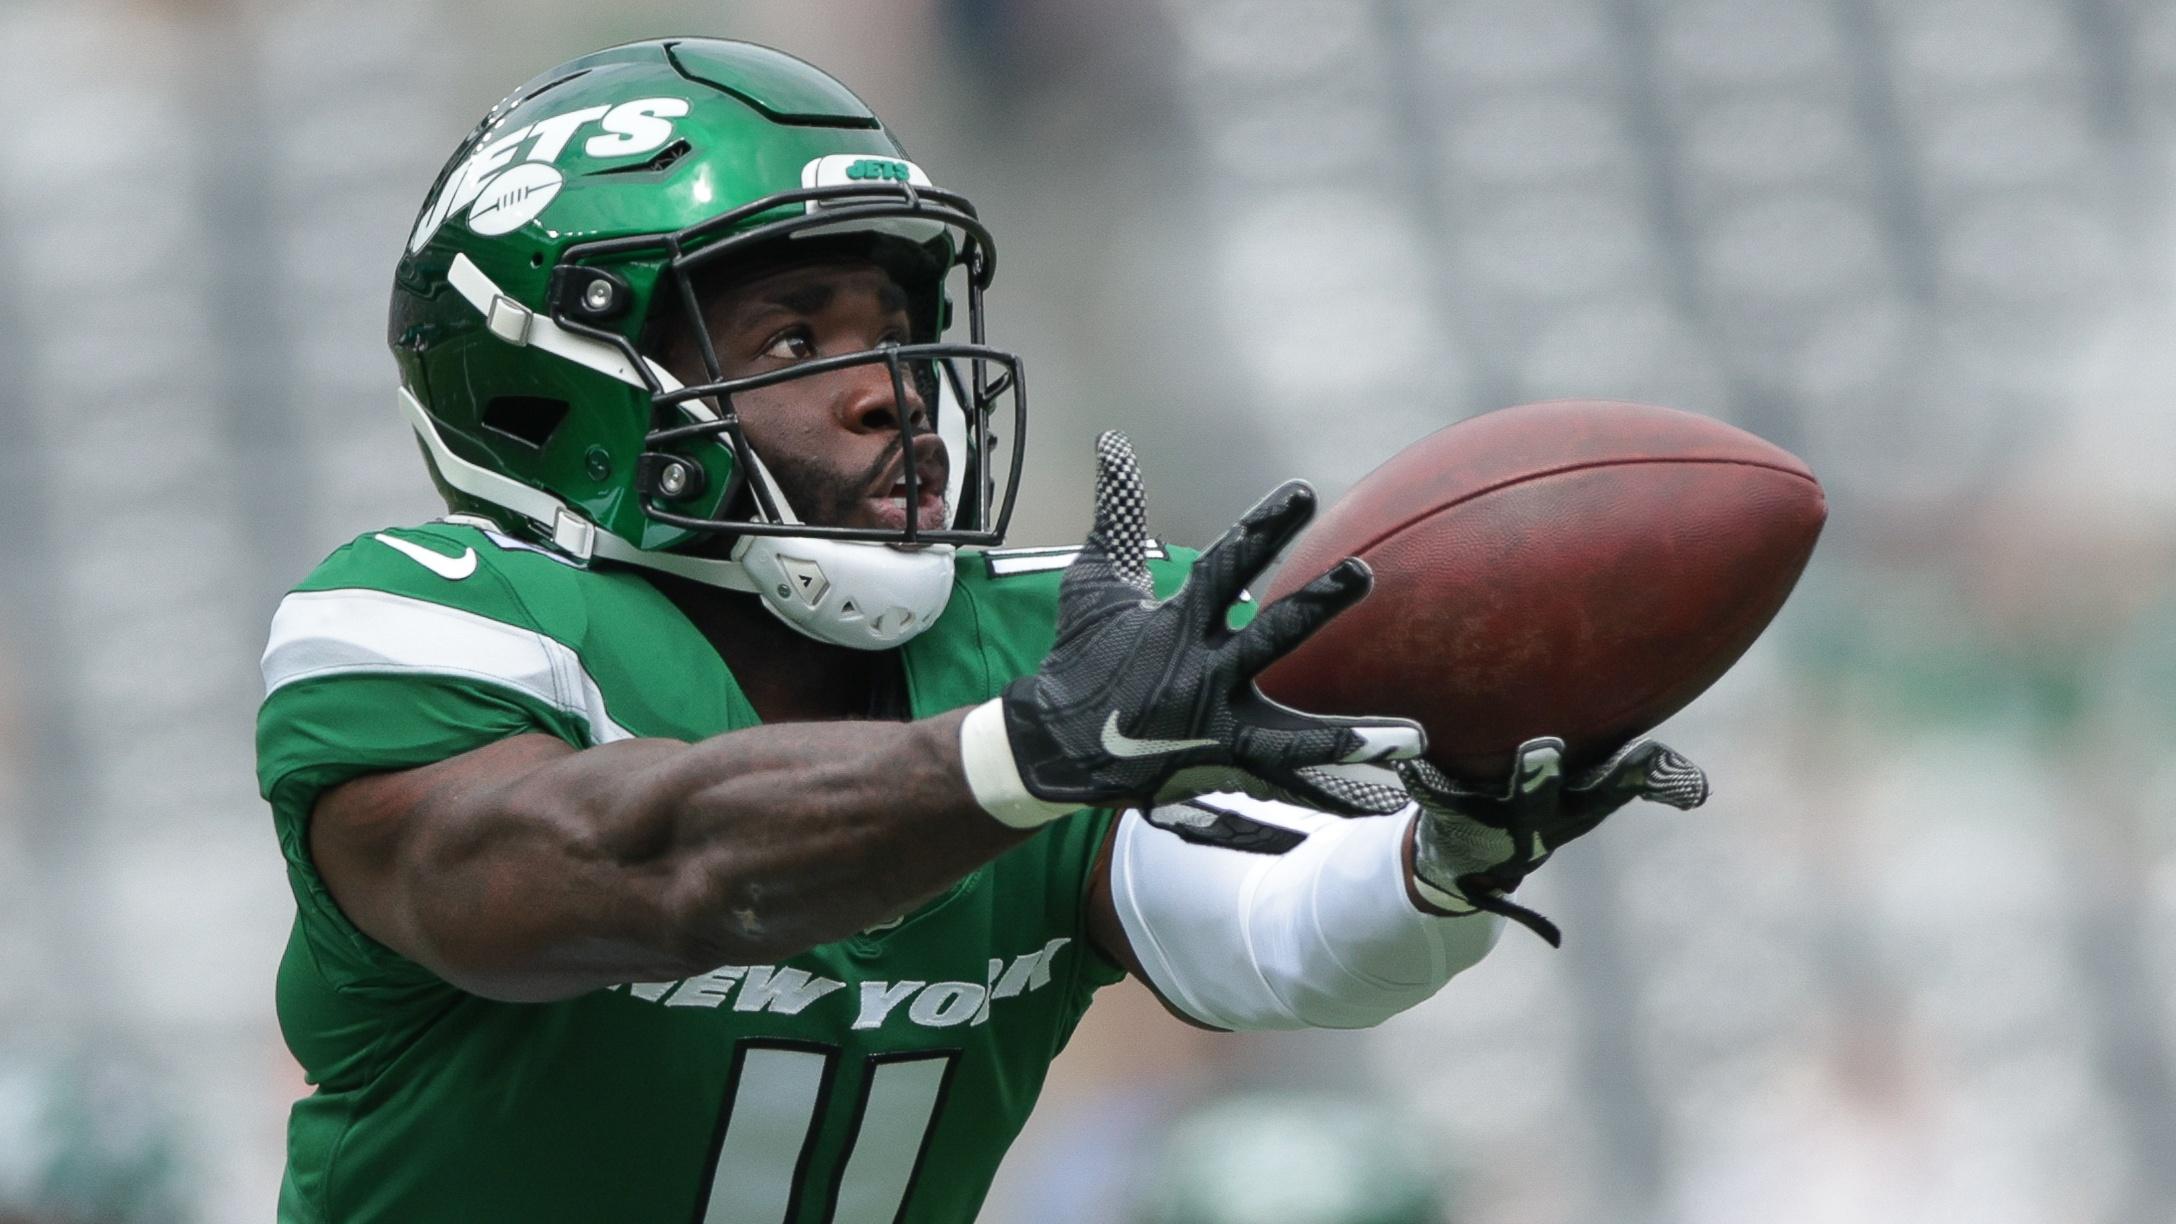 New York Jets wide receiver Denzel Mims (11) catches the ball before the game against the New York Giants at MetLife Stadium / Vincent Carchietta - USA TODAY Sports